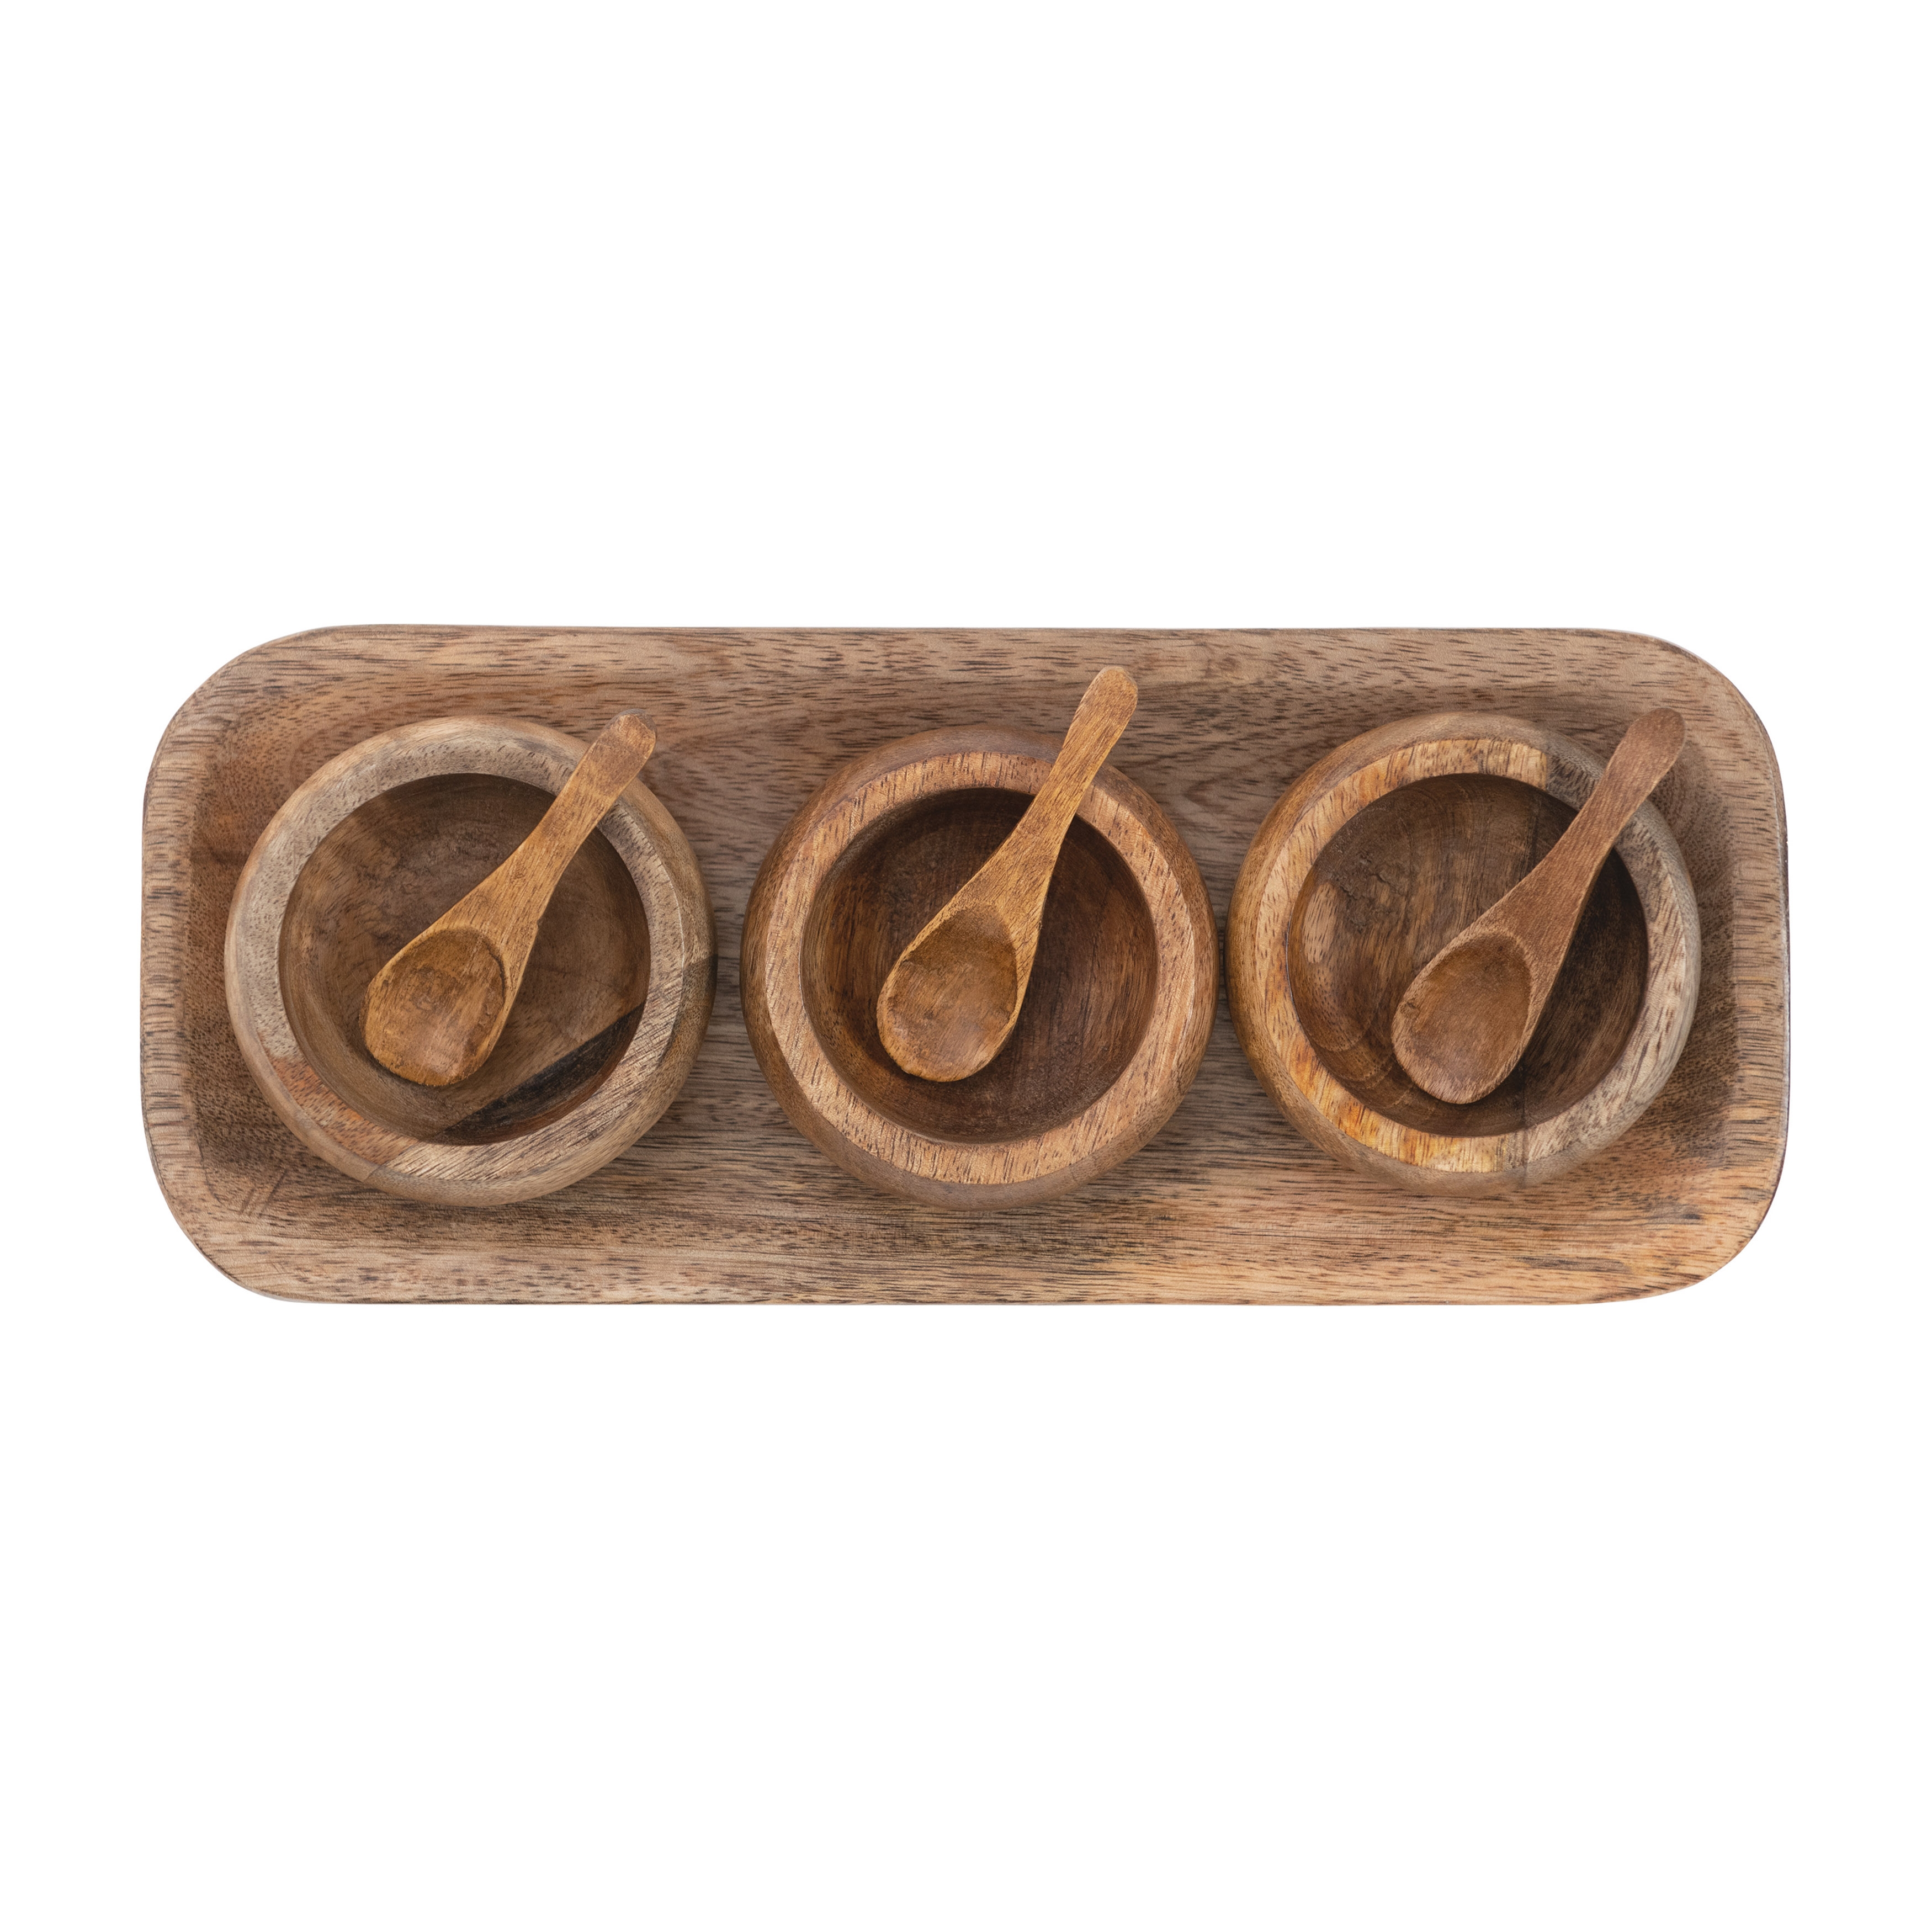 Mango Wood Tray with 3 Spice Bowls and 3 Wood Spoons, Set of 7 - Image 0